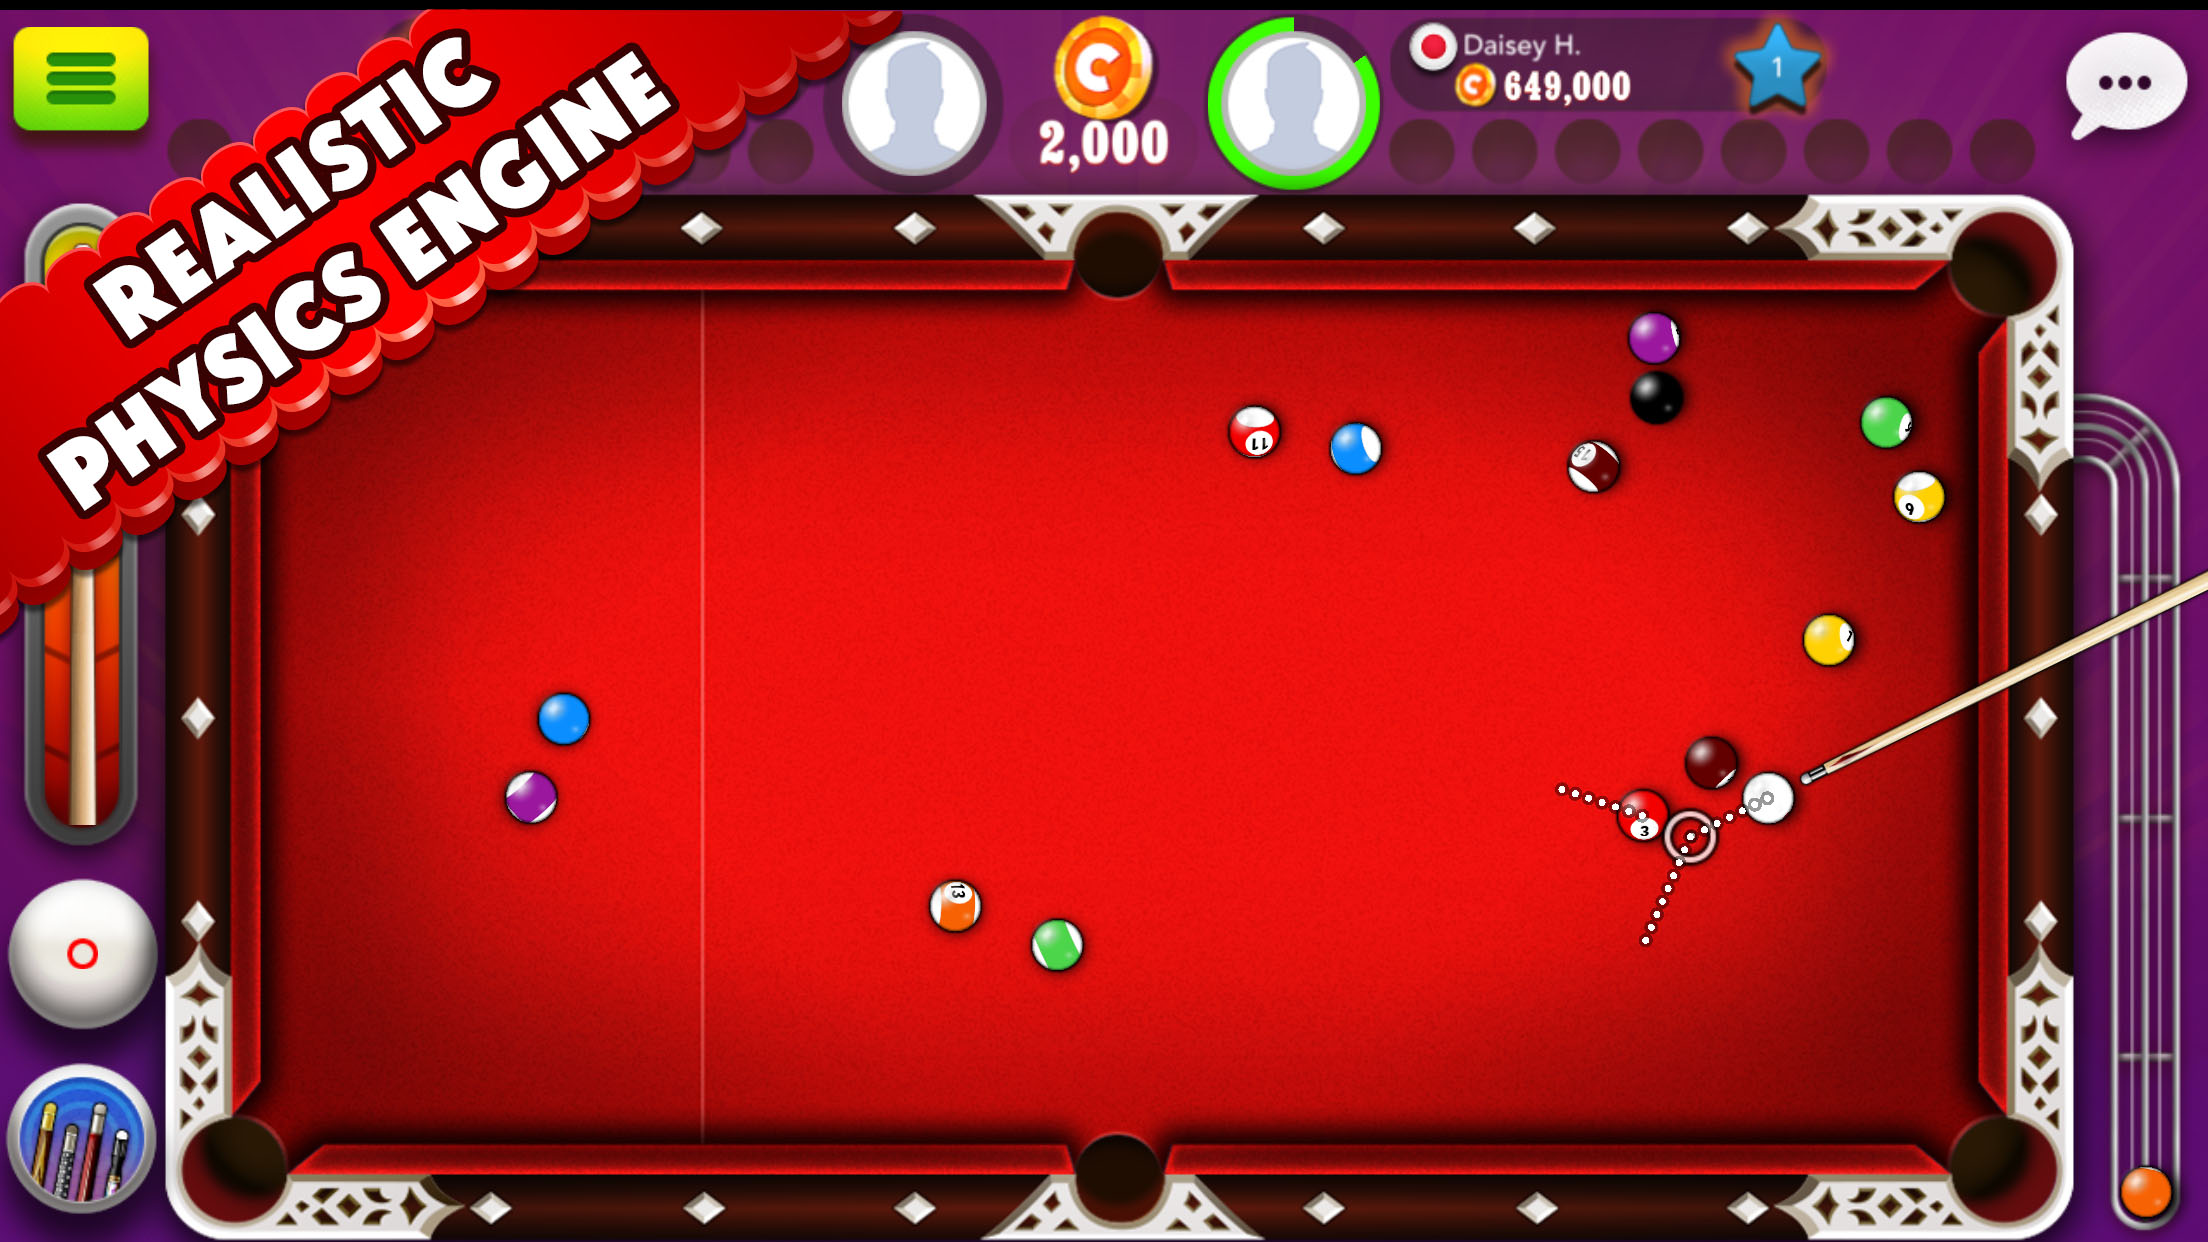 Online pool game - An Ideal table game to socialize